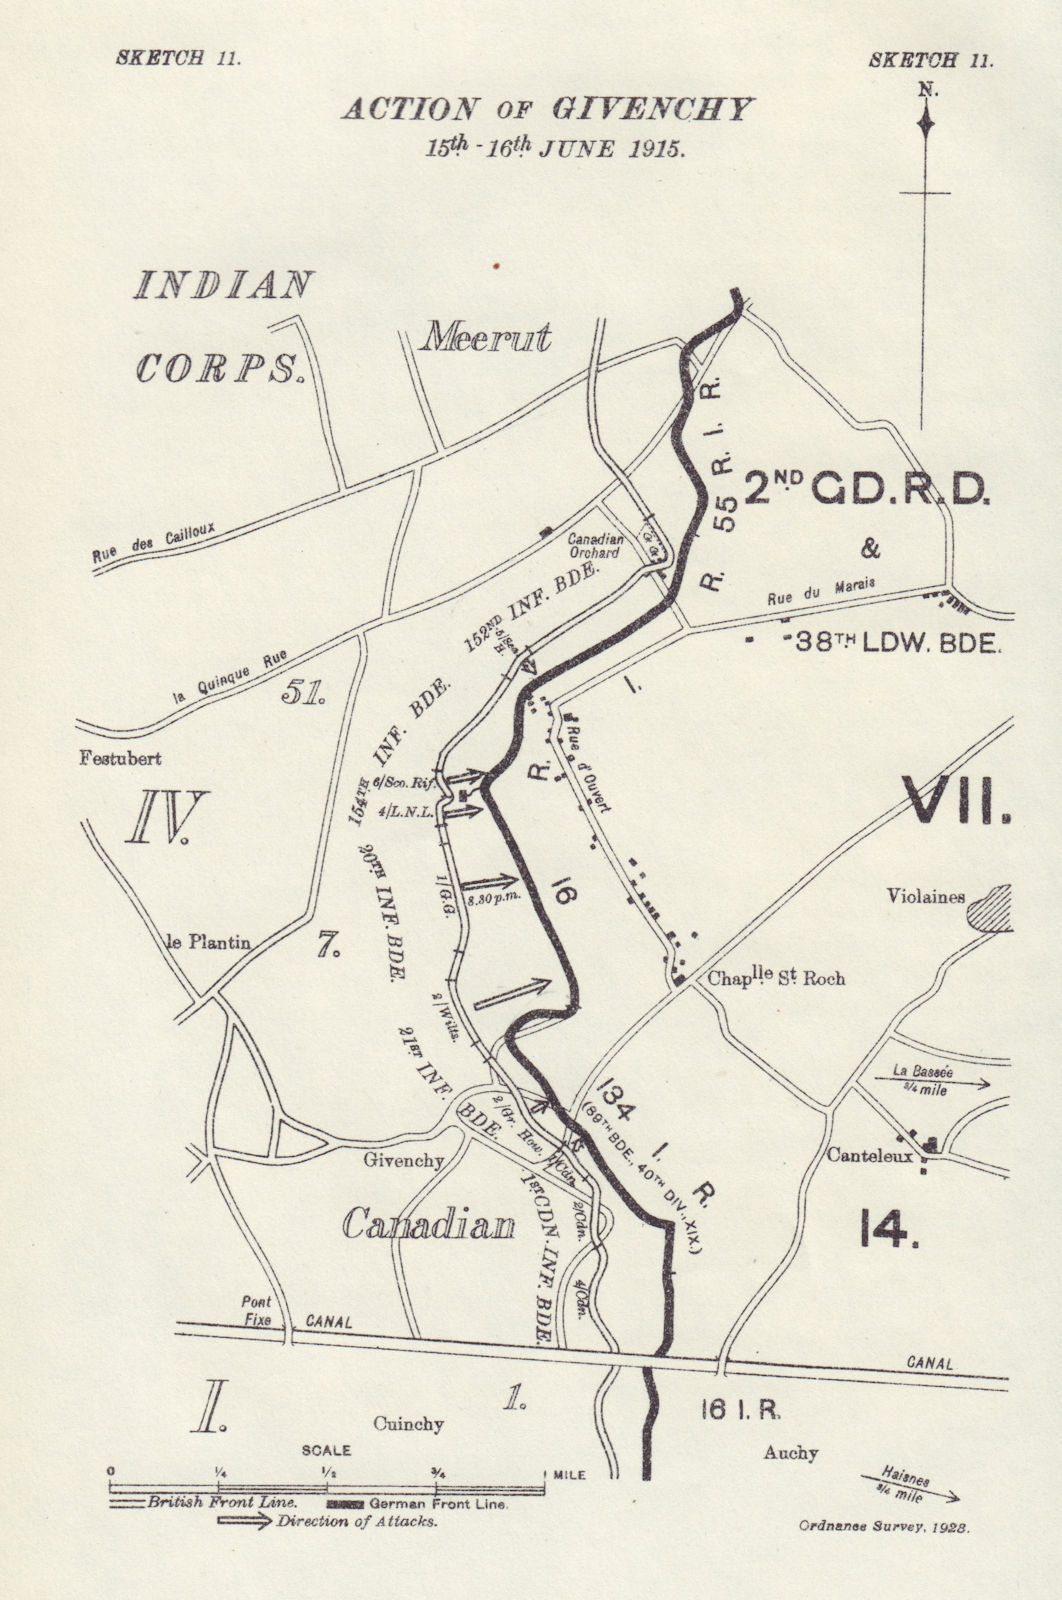 Action of Givenchy 15-16th June 1915. Battle of Artois First World War. 1928 map